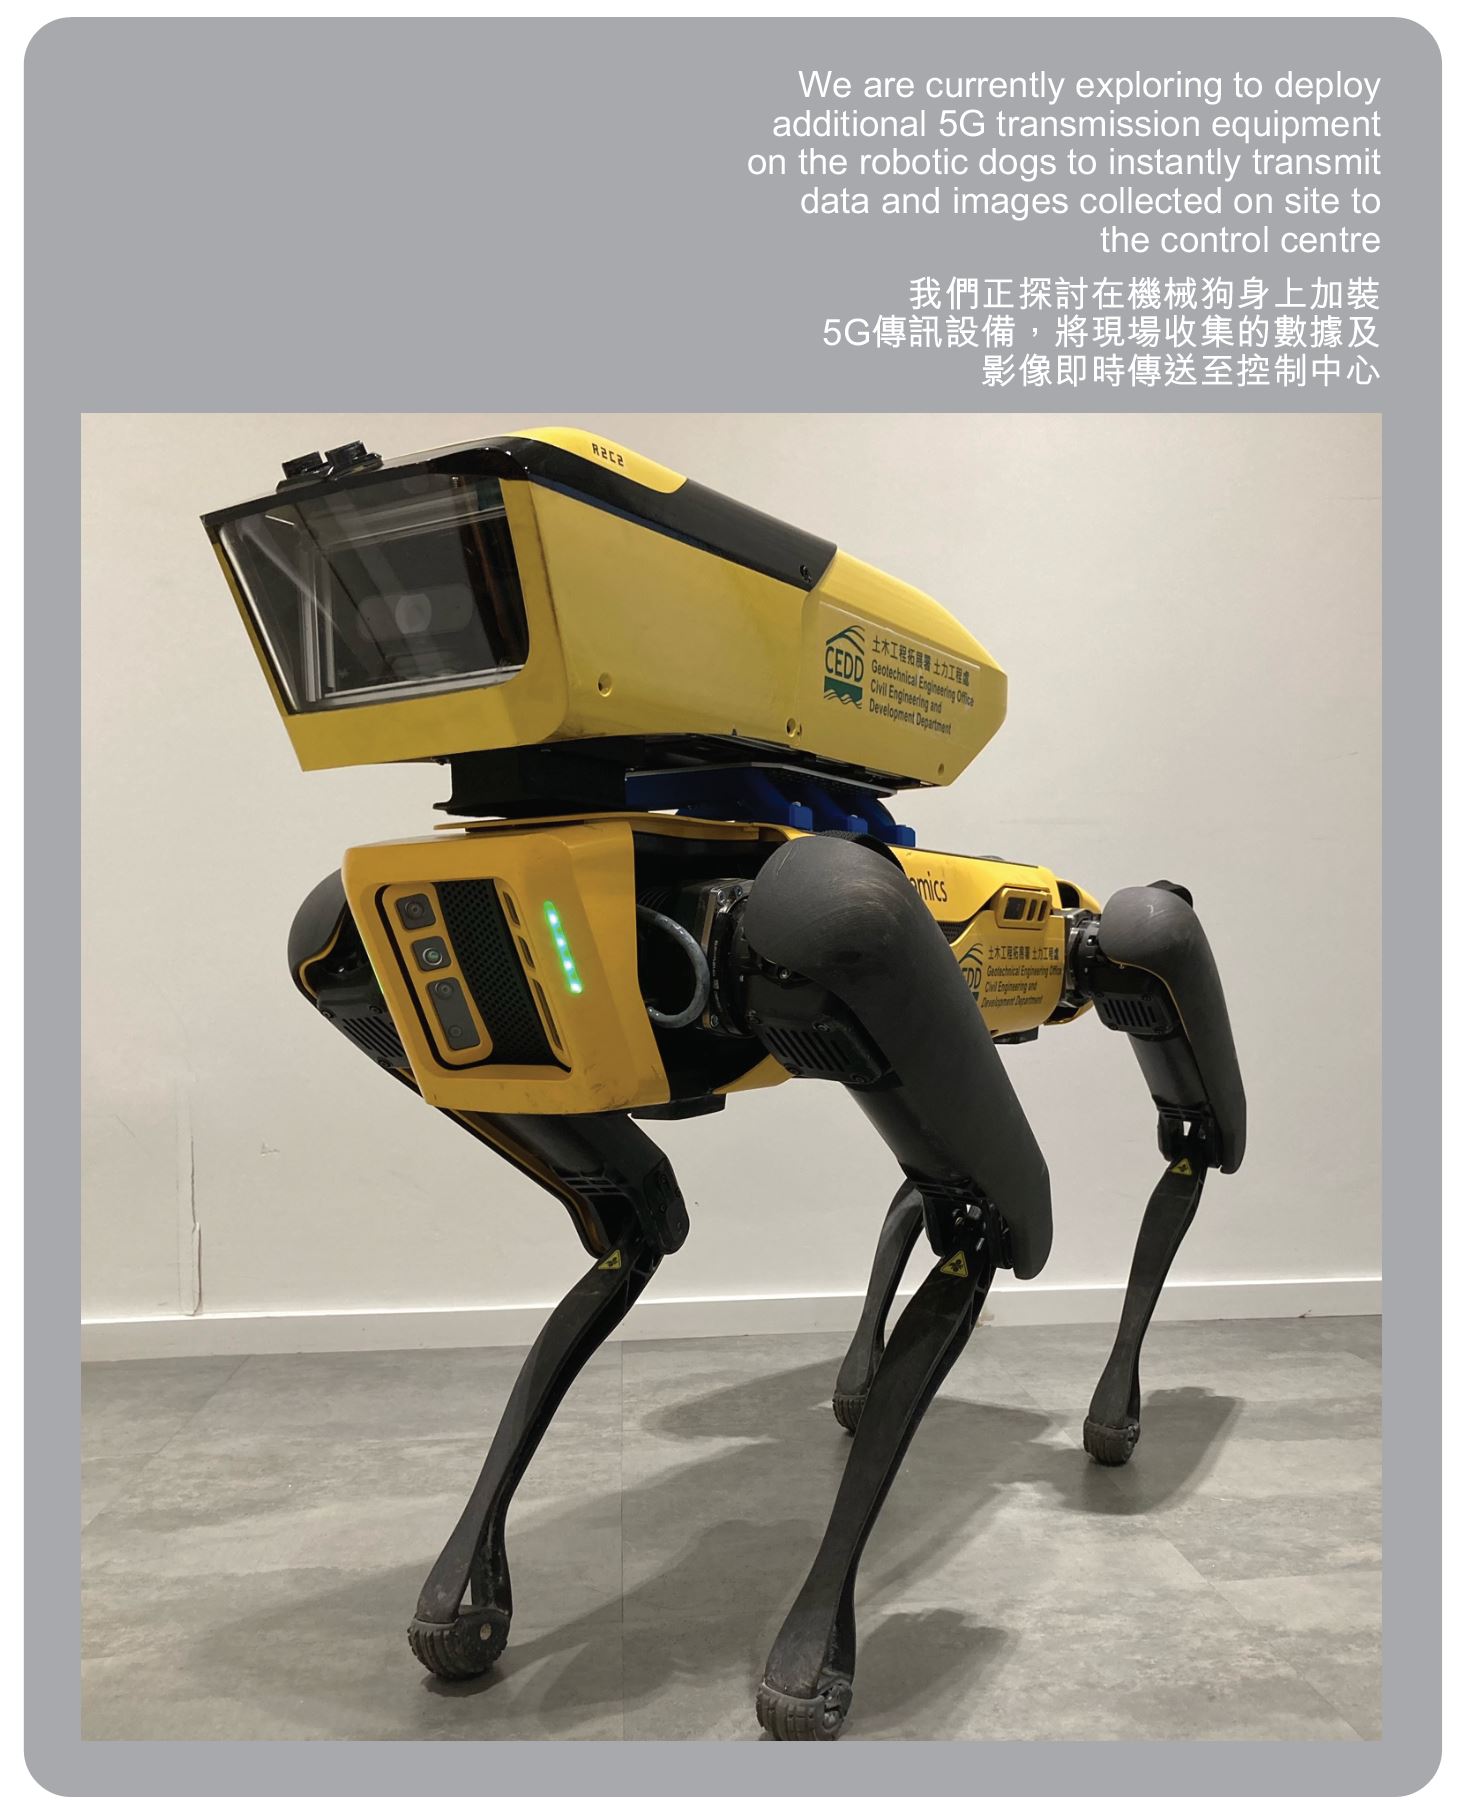 We are currently exploring to deploy additional 5G transmission equipment on the robotic dogs to instantly transmit data and images collected on site to the control centre